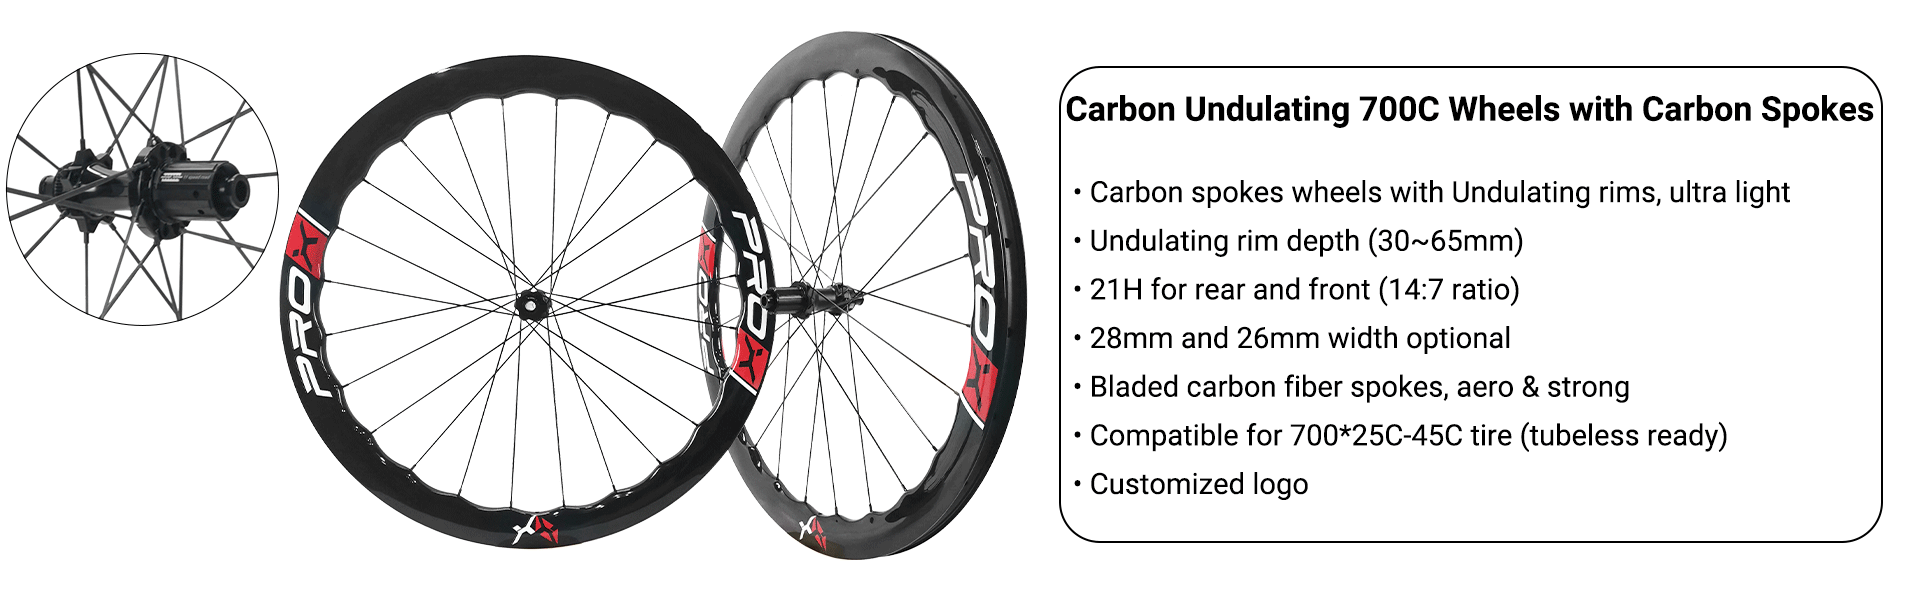 ProX Ultra Light Carbon Spoke Wheels with Undulating Road Rims